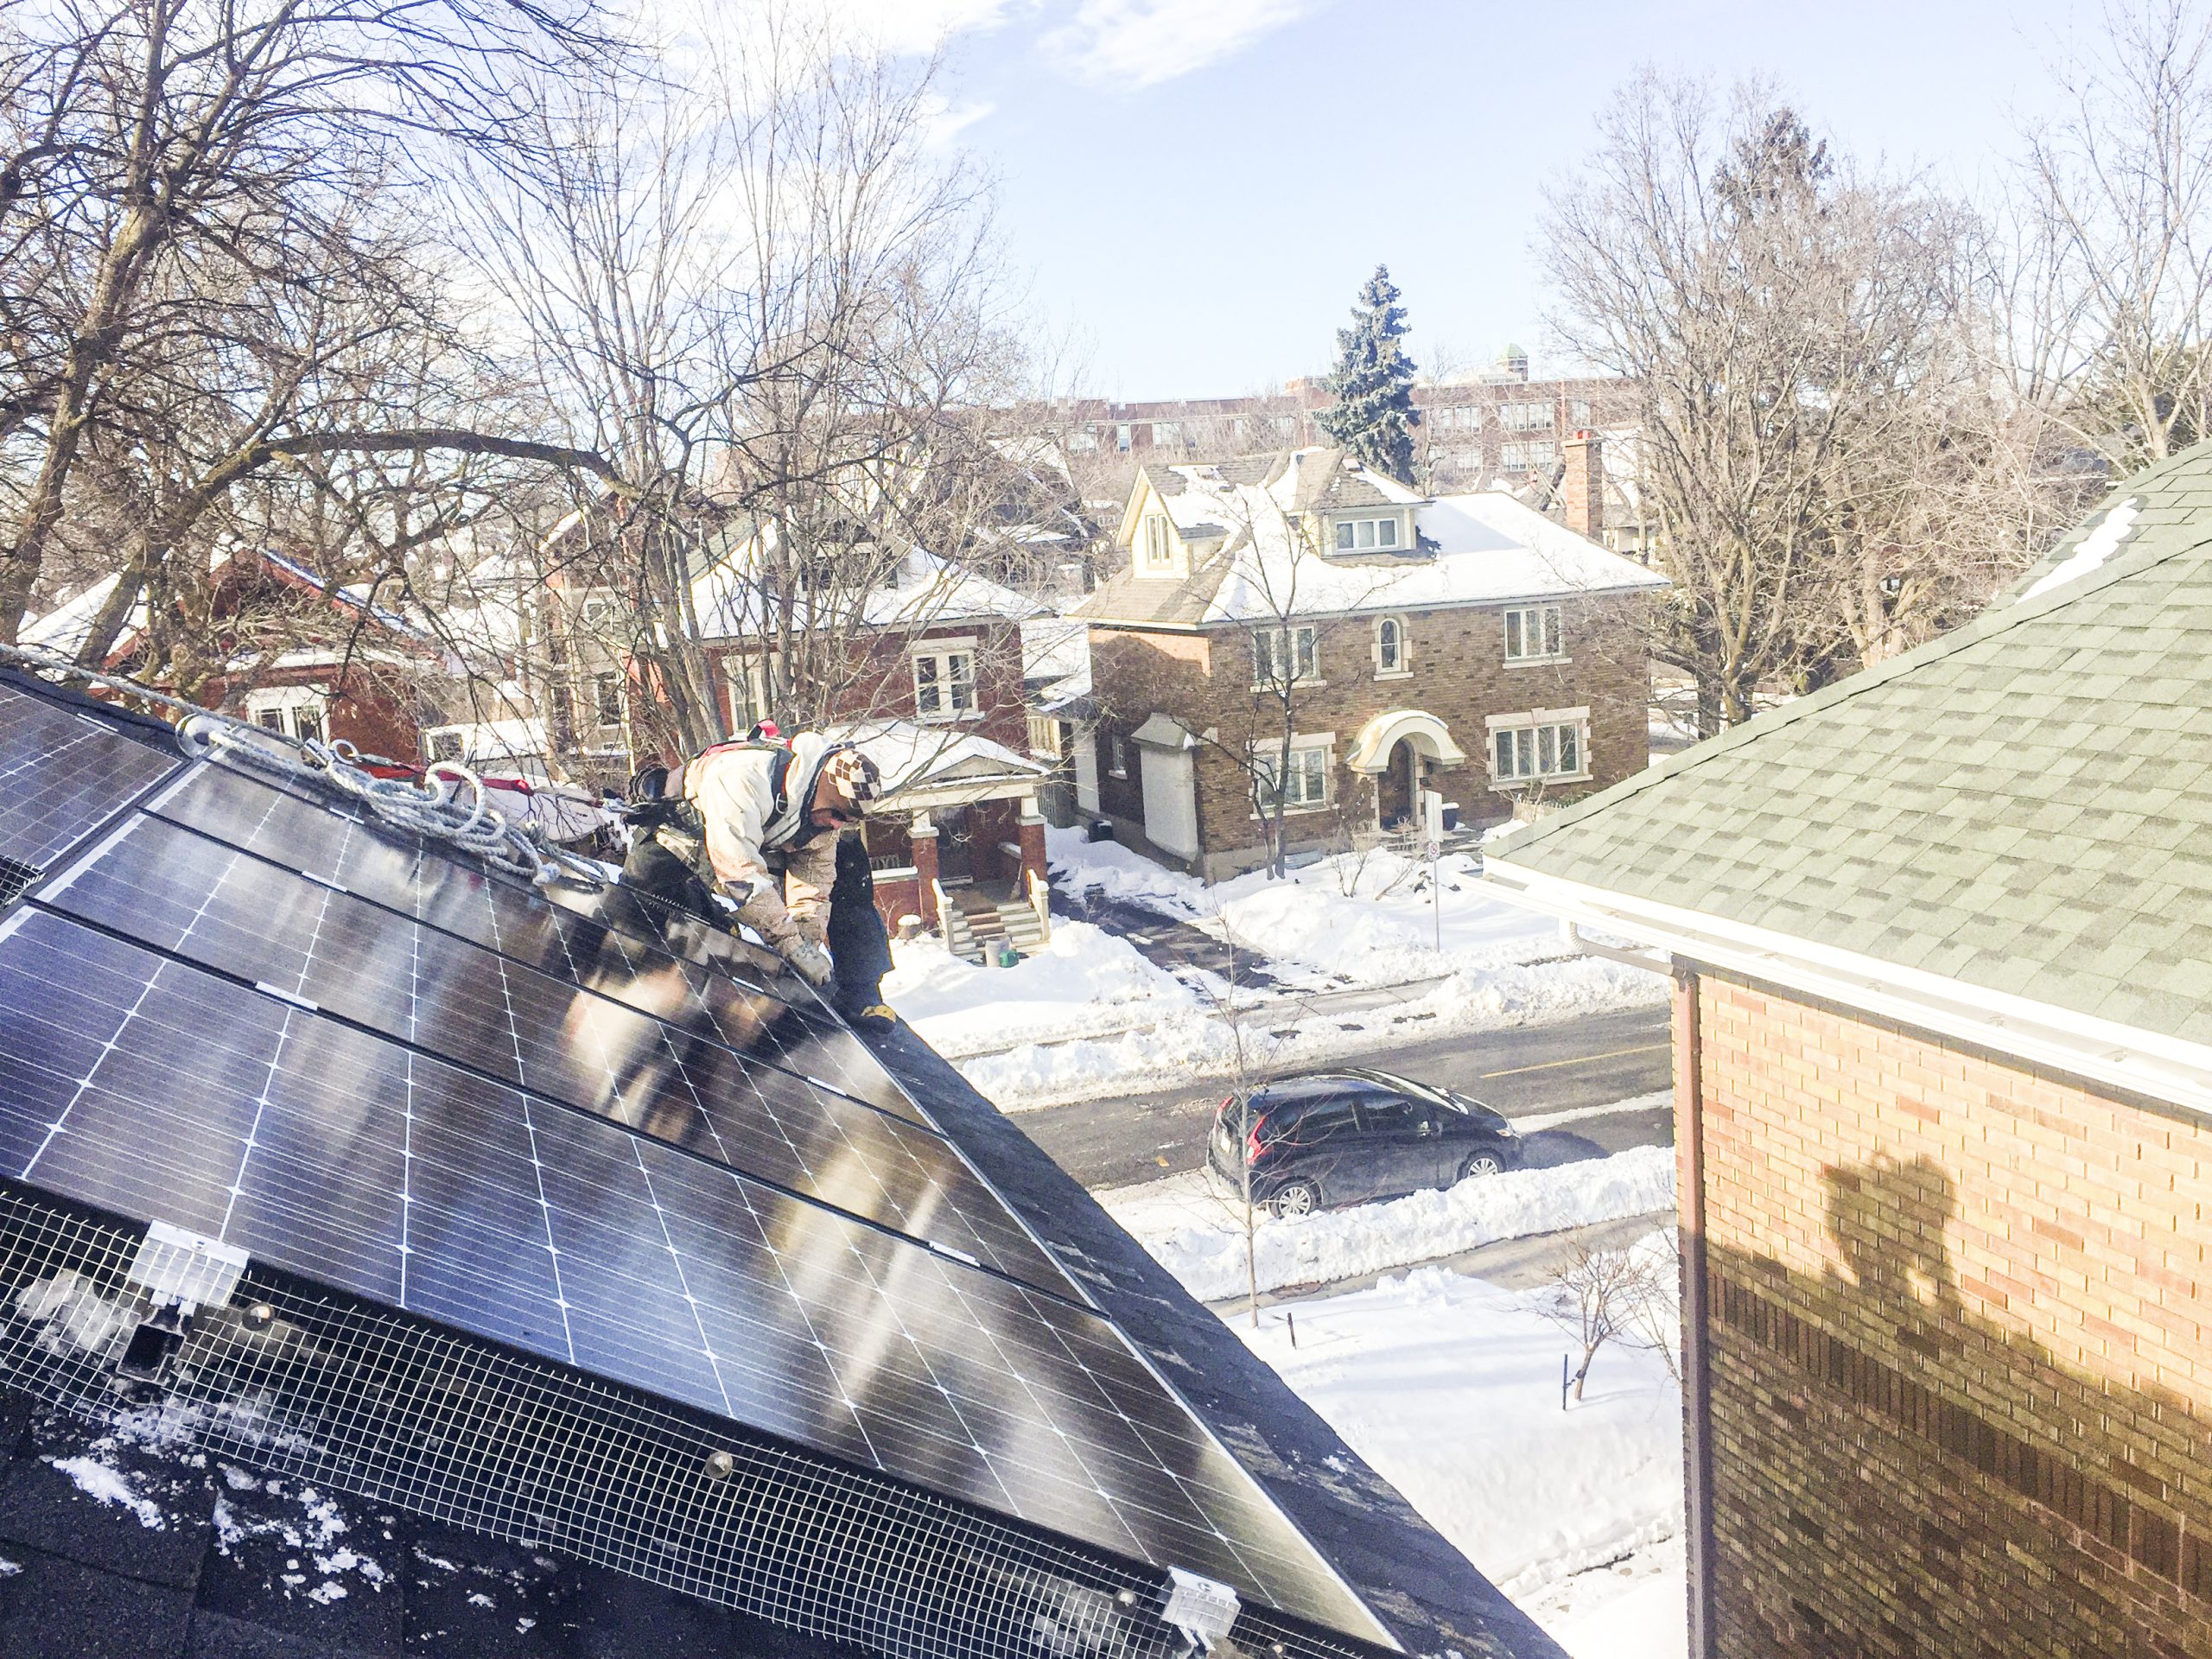 Hear from your neighbours how their carbon-footprint choices were made, in a series of GCA-led coffee houses this winter. Here we see a solar panel installation. Photos: John Humphries